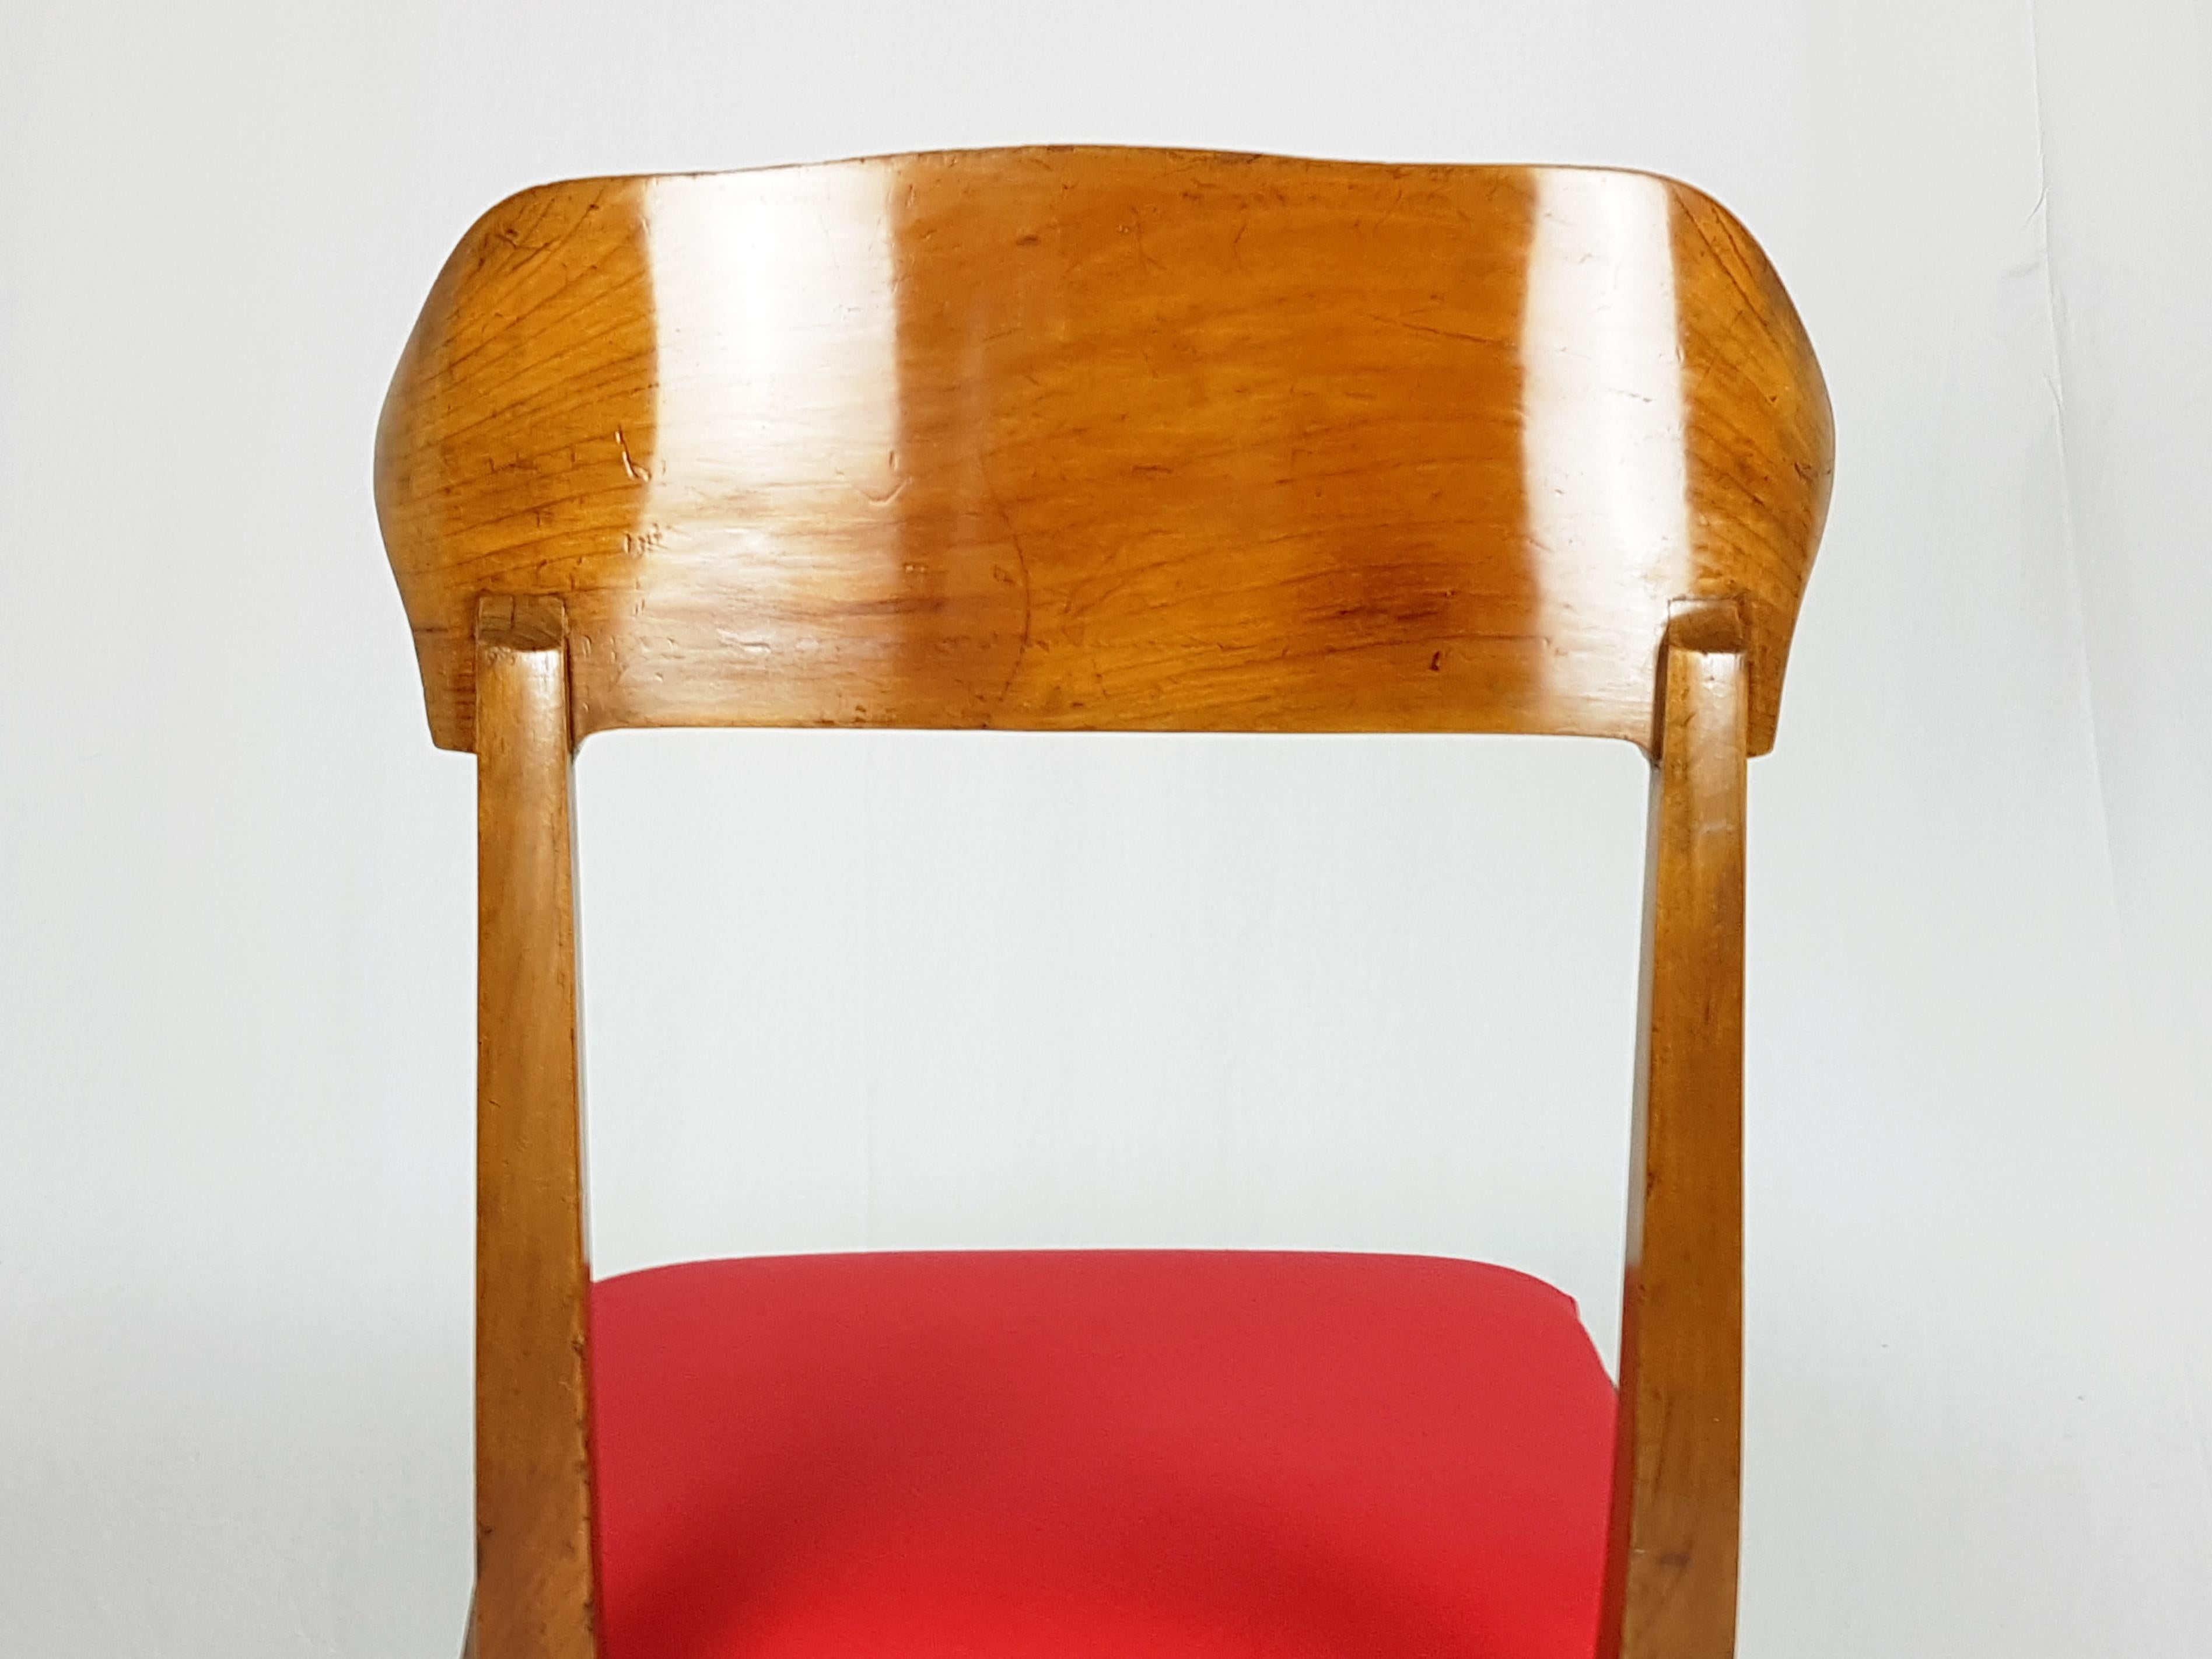 Midcentury Wood and Red Fabric Side Chairs from Fratelli Barni Mobili d'Arte For Sale 4